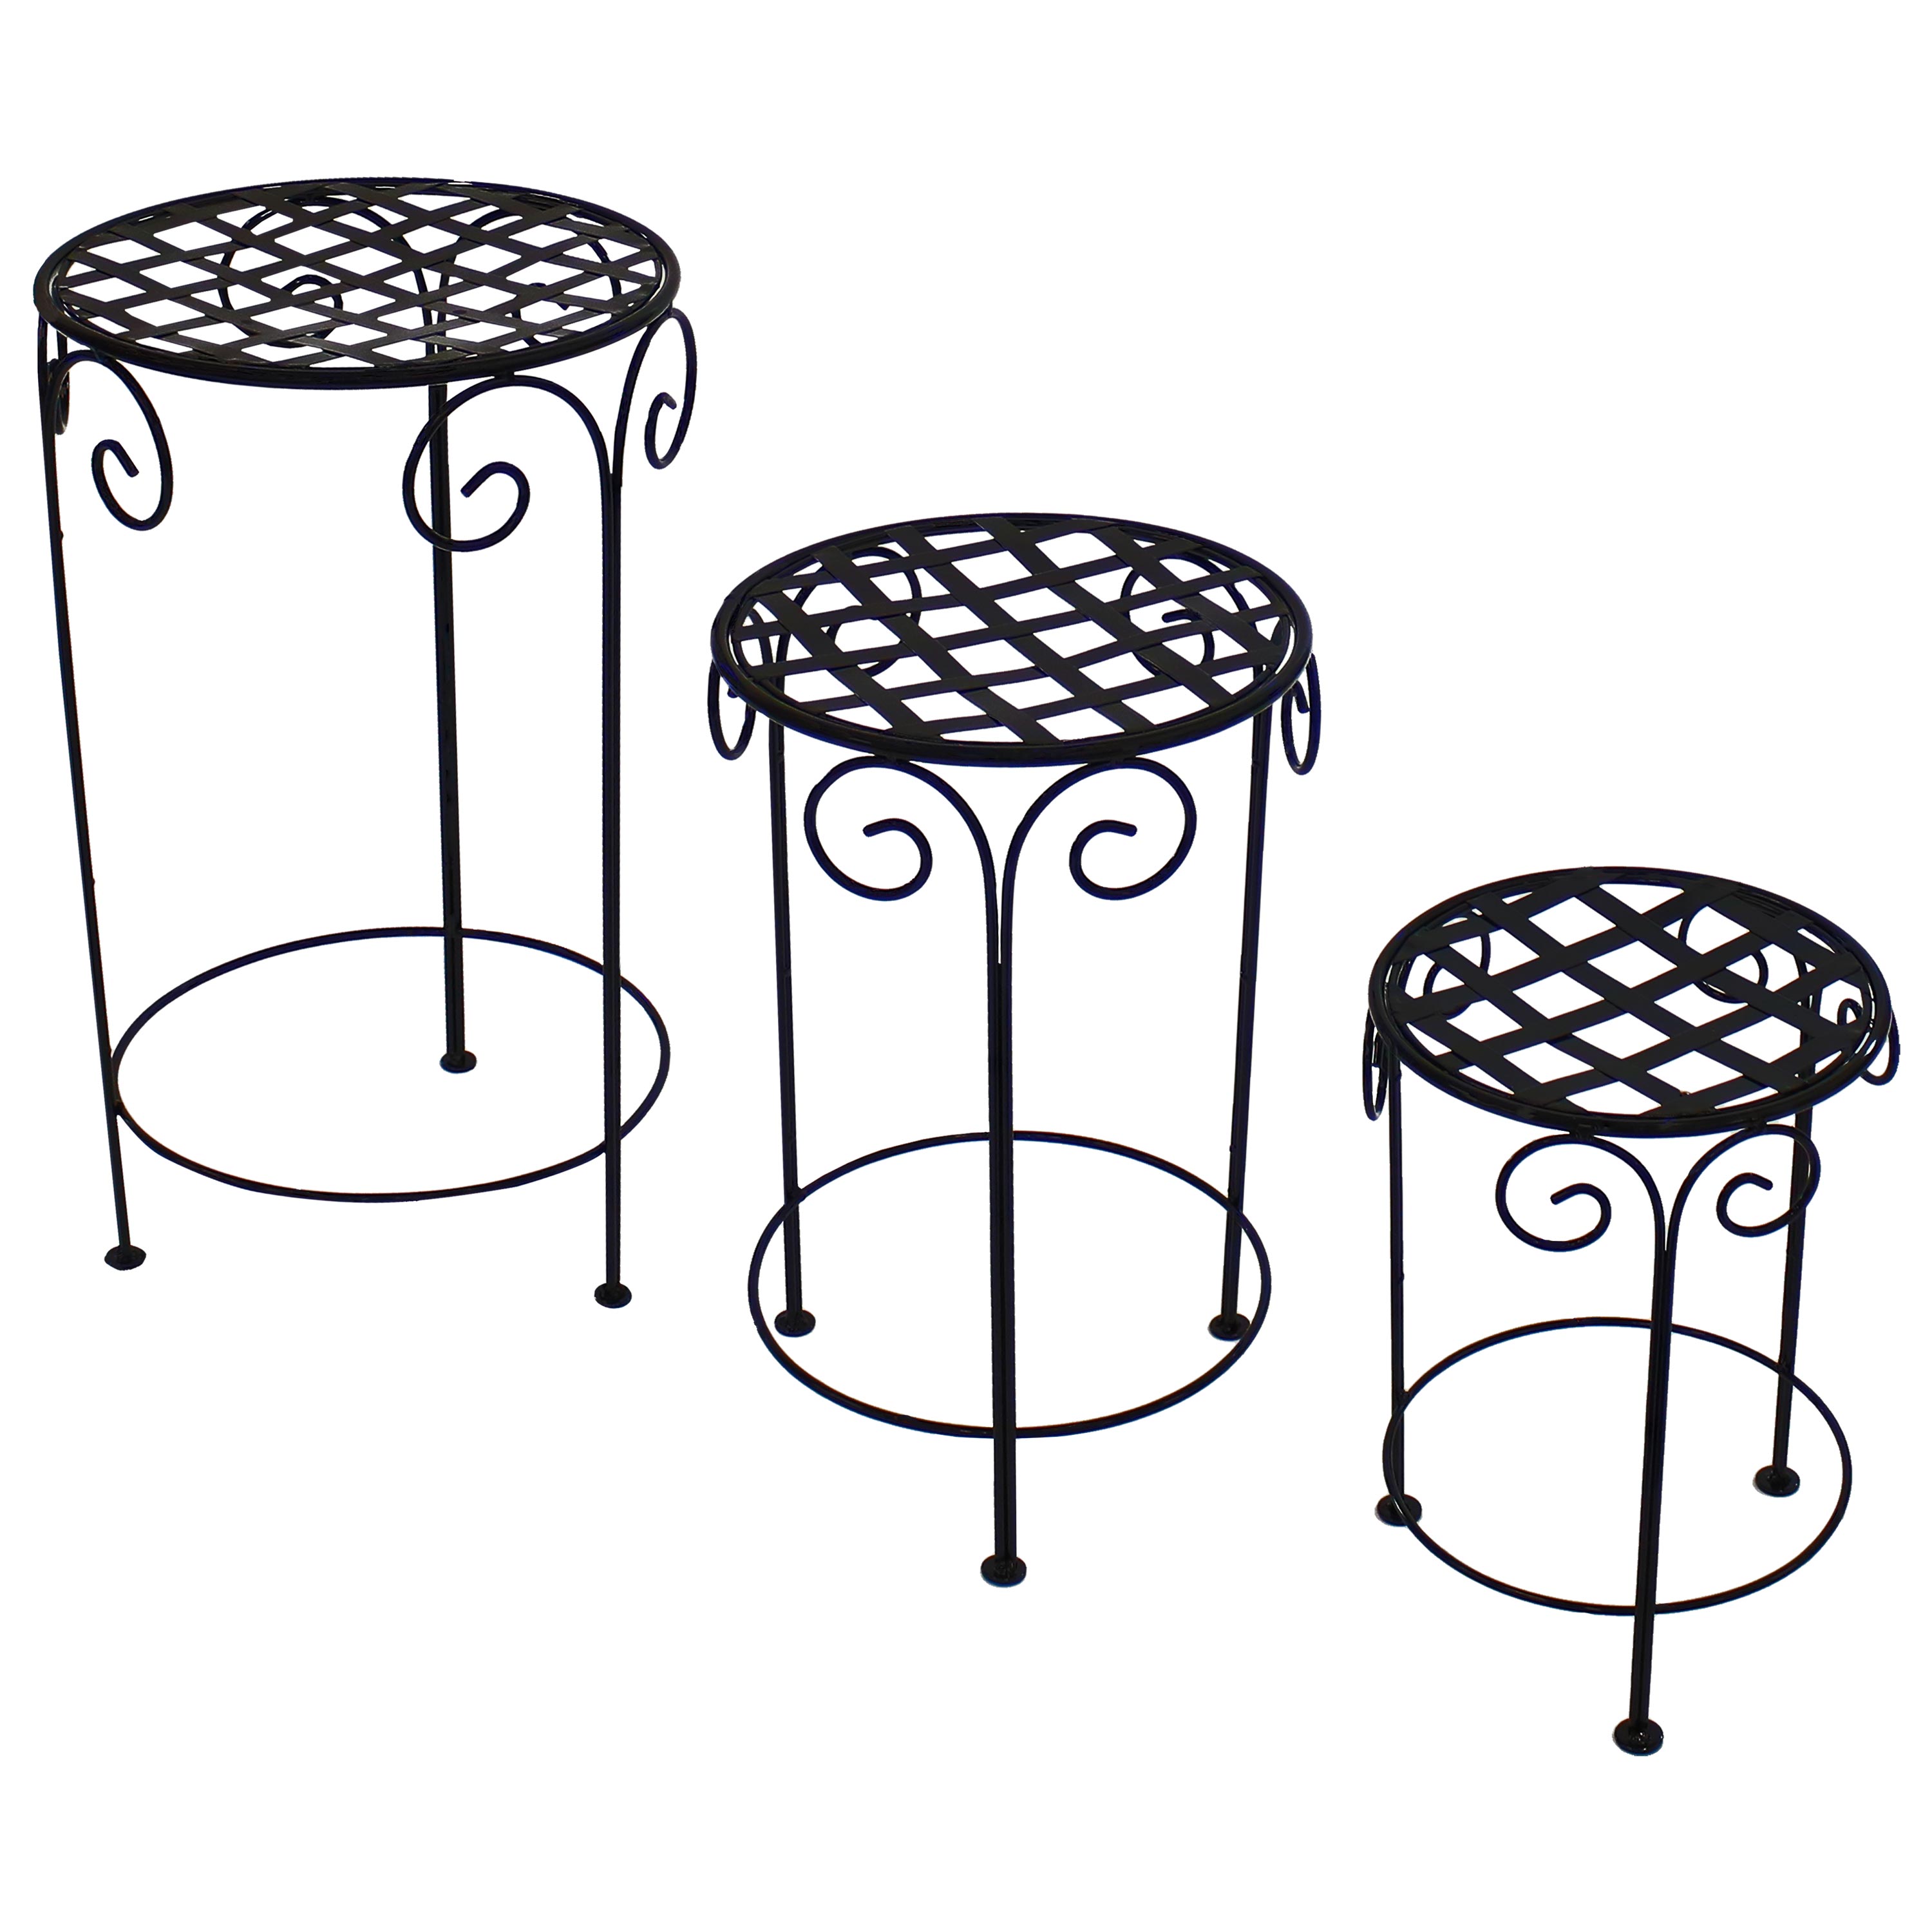 Black 14 in, 19 in, 24 in Plant Stand with Scroll Design